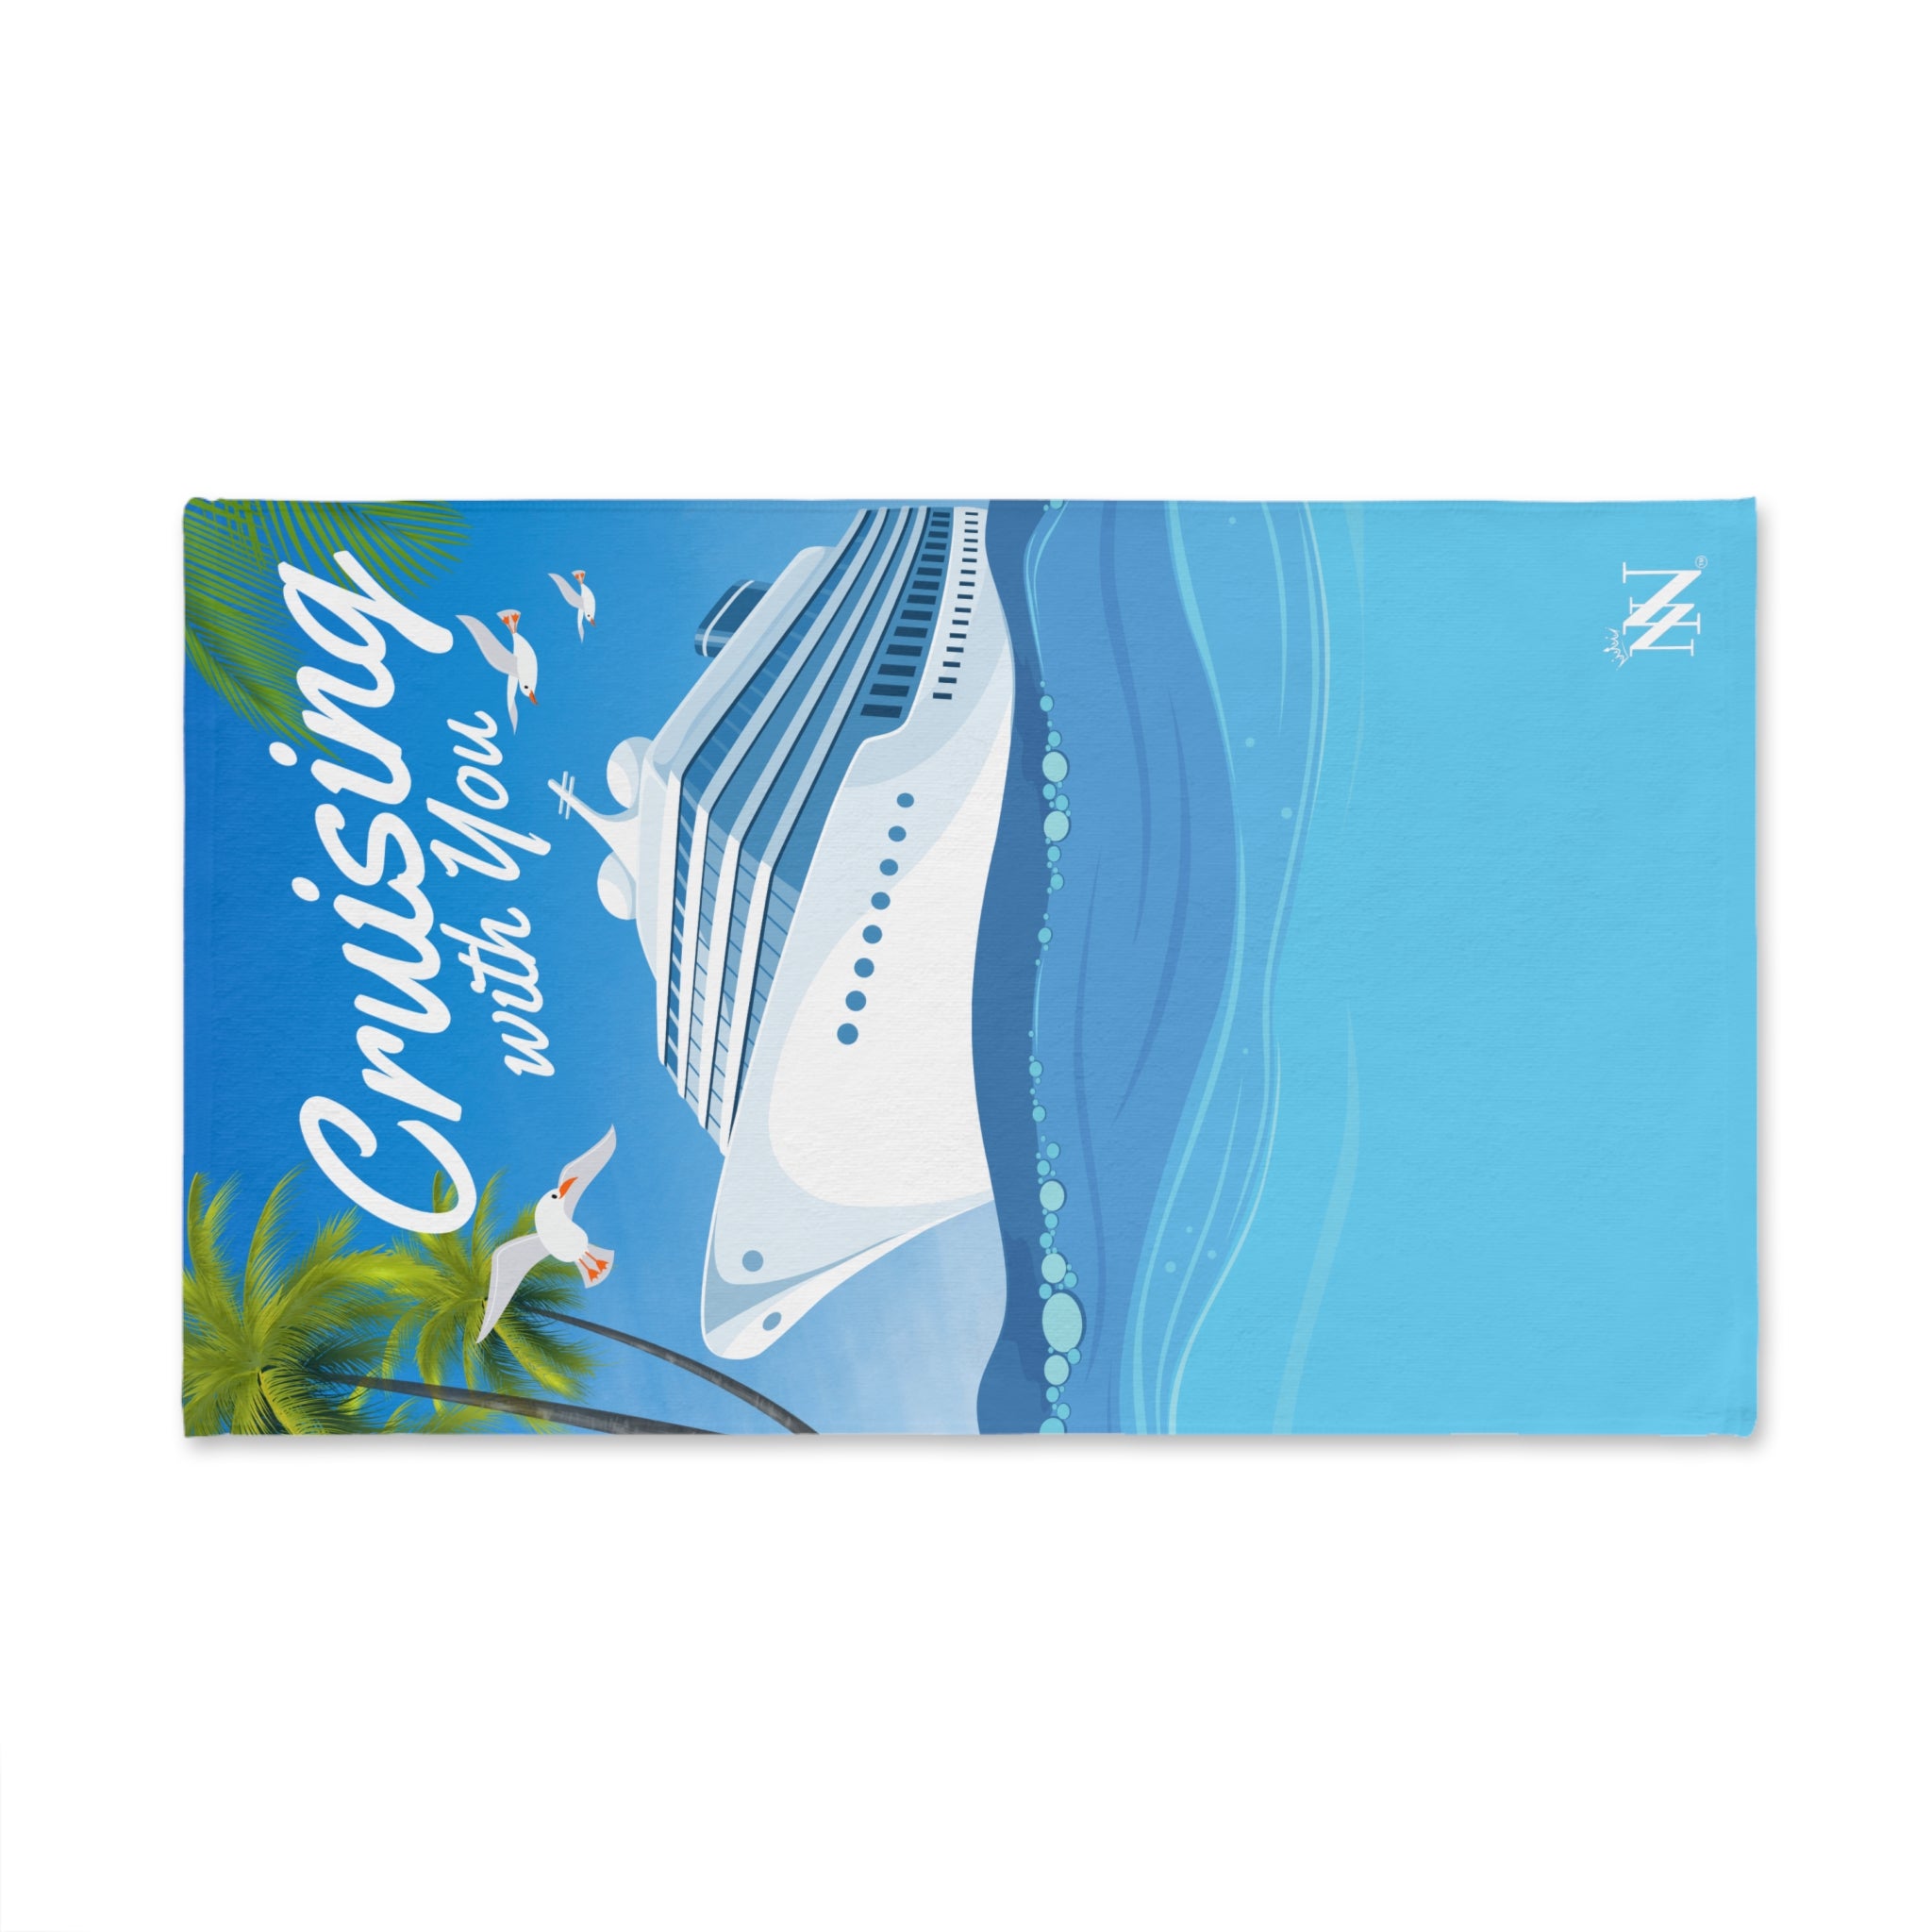 Cruising with You vacation sex towel